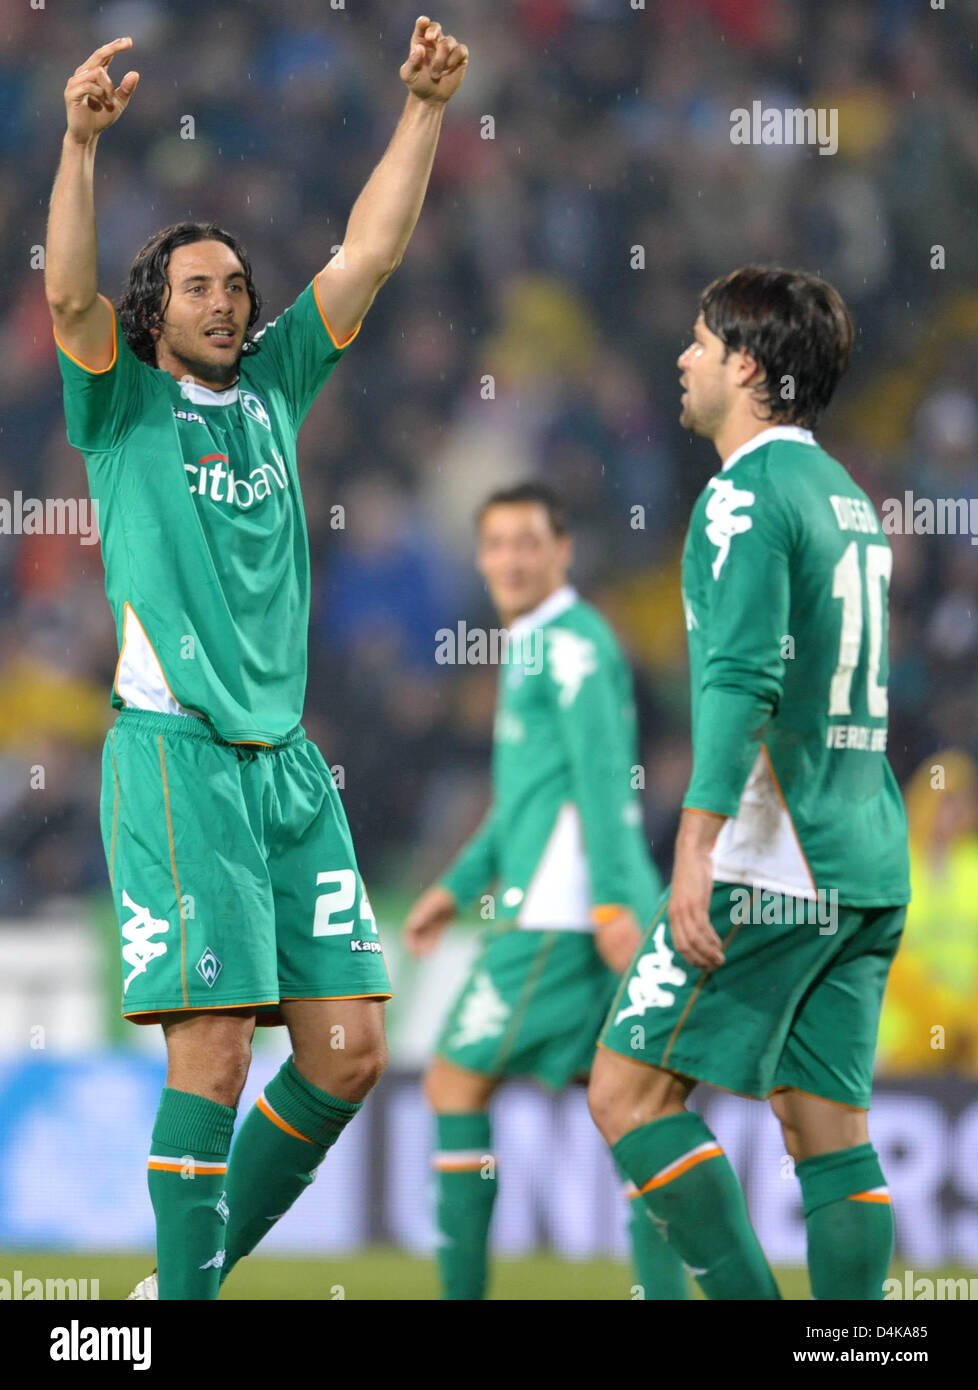 Bremen?s Claudio Pizarro (L) cheers with his team mate Diego after his goal to 3-3 during the UEFA Cup quarter finals second leg match Udinese vs Werder Bremen at Stadio Friuli in Udine, Italy, 16 April 2009. The match tied 3-3. Photo: Carmen Jaspersen Stock Photo